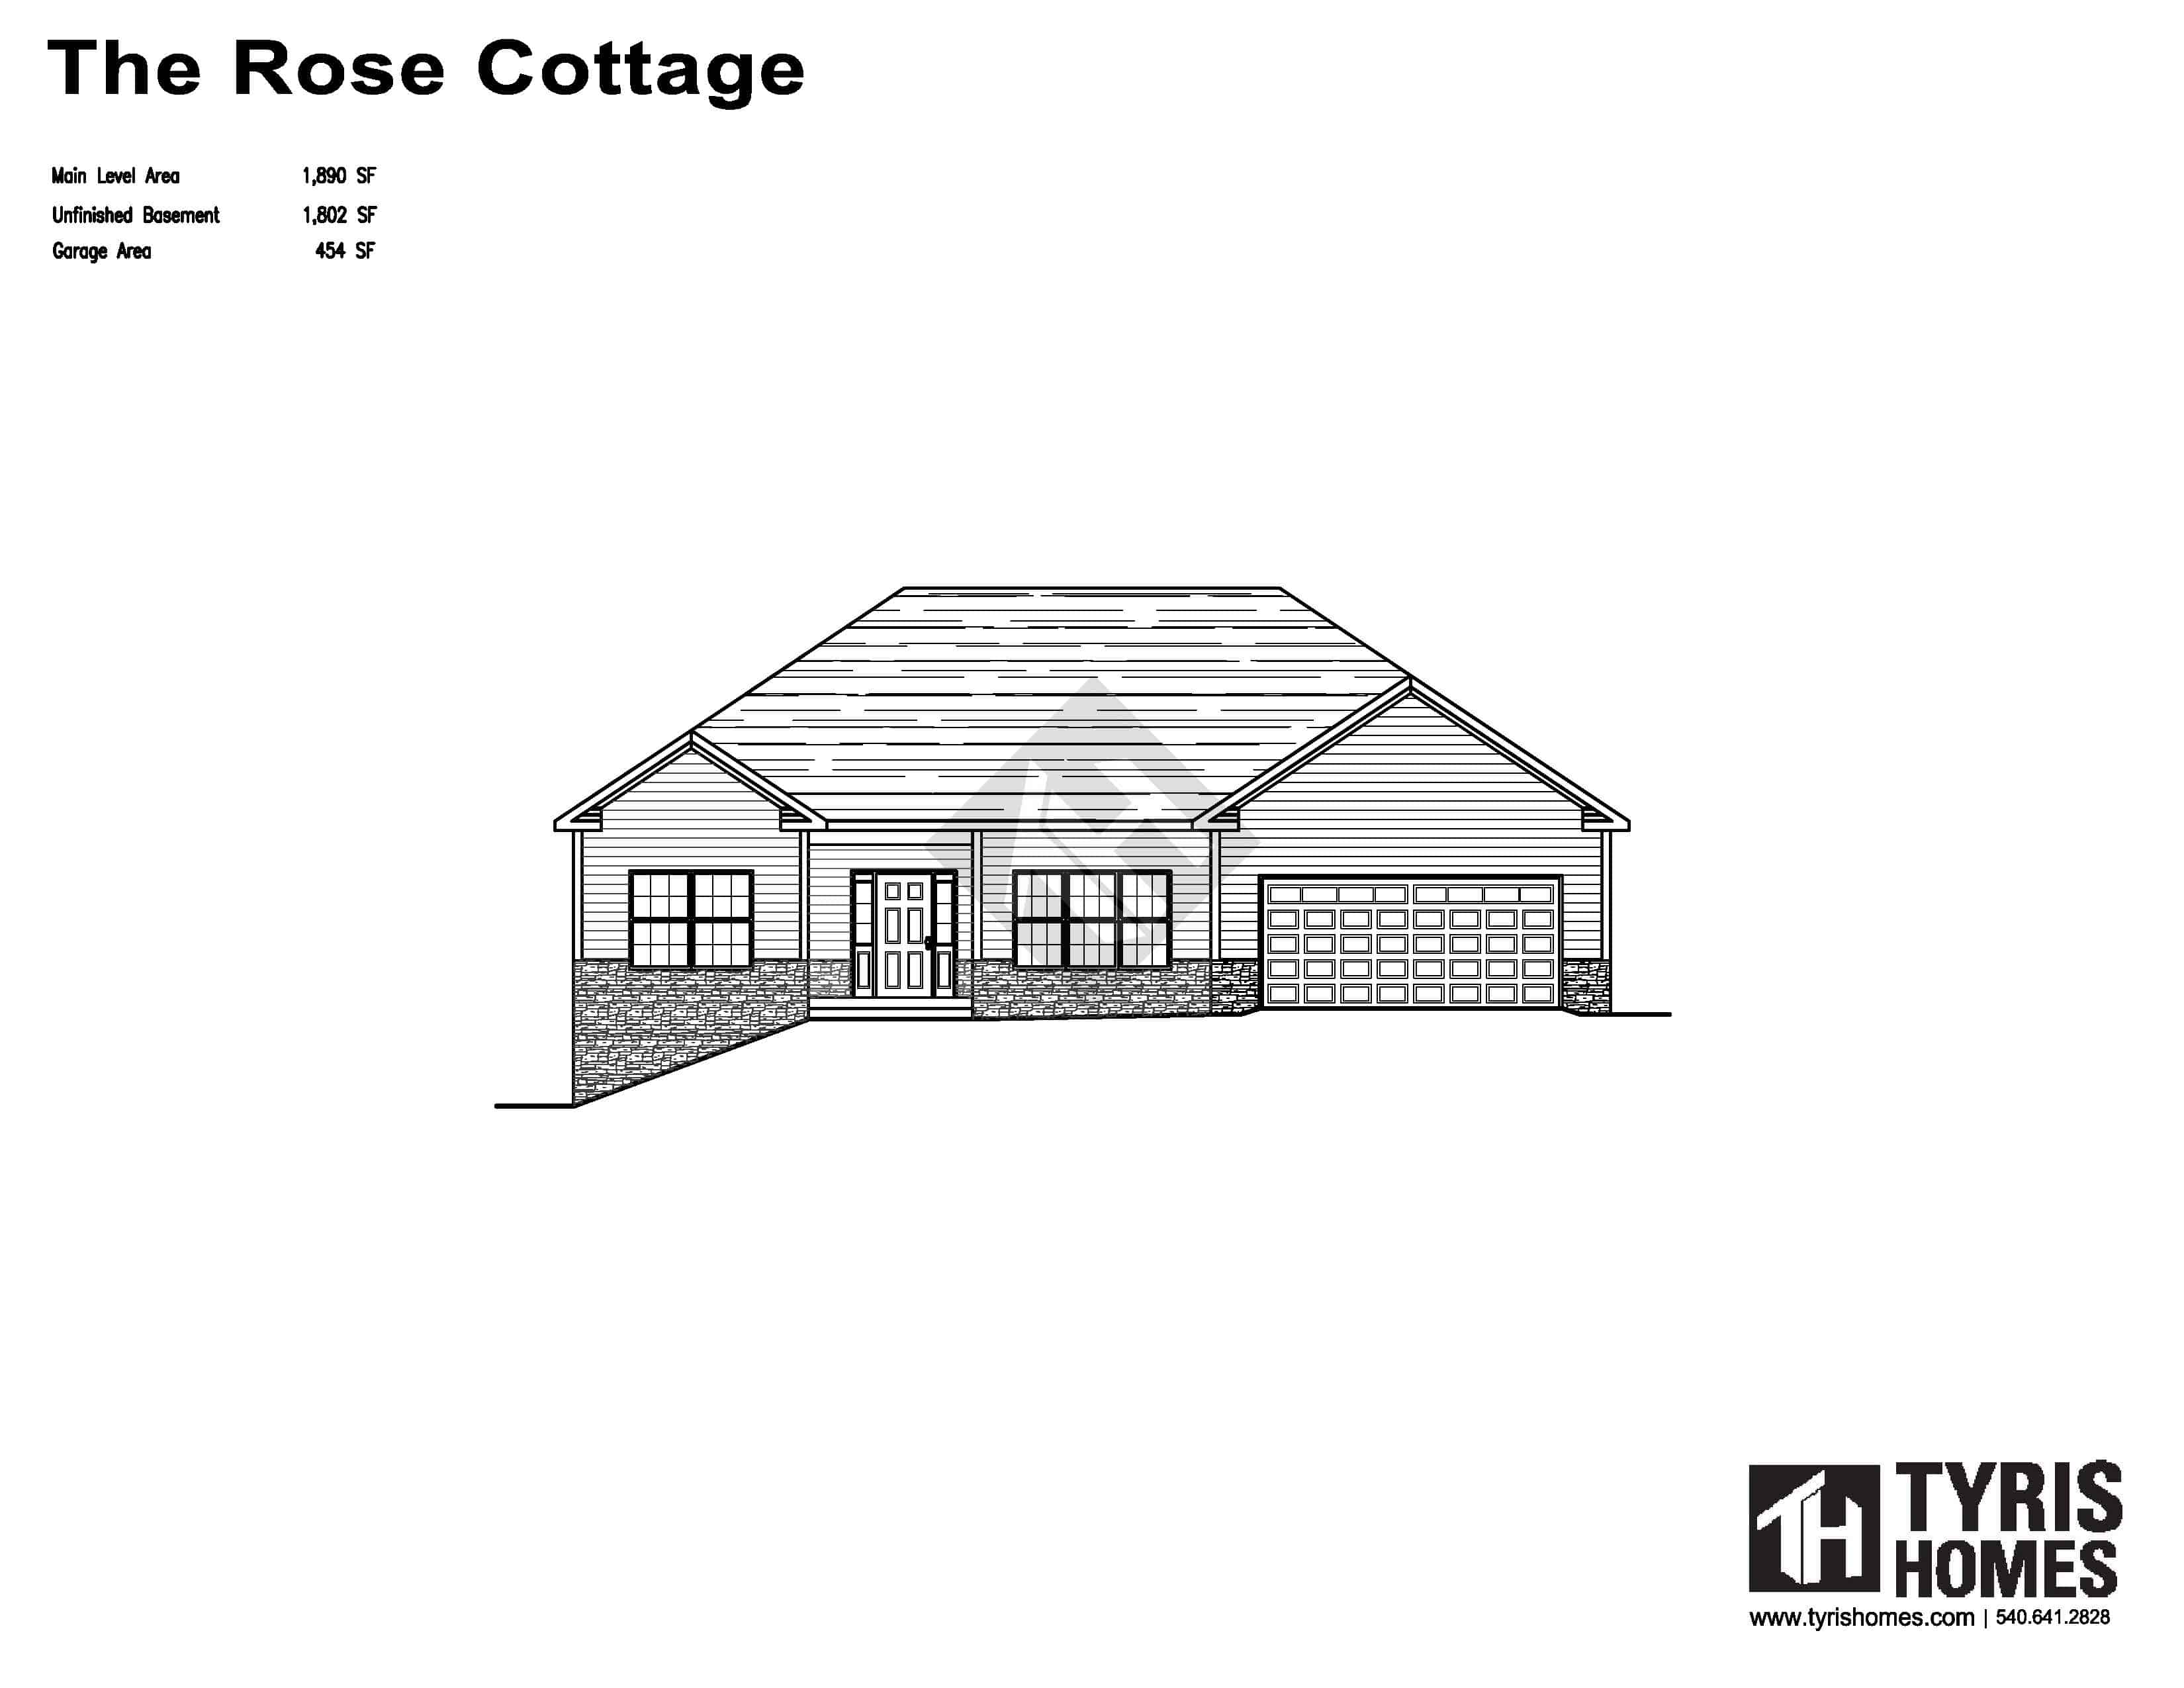 The Rose Cottage Tyris Homes